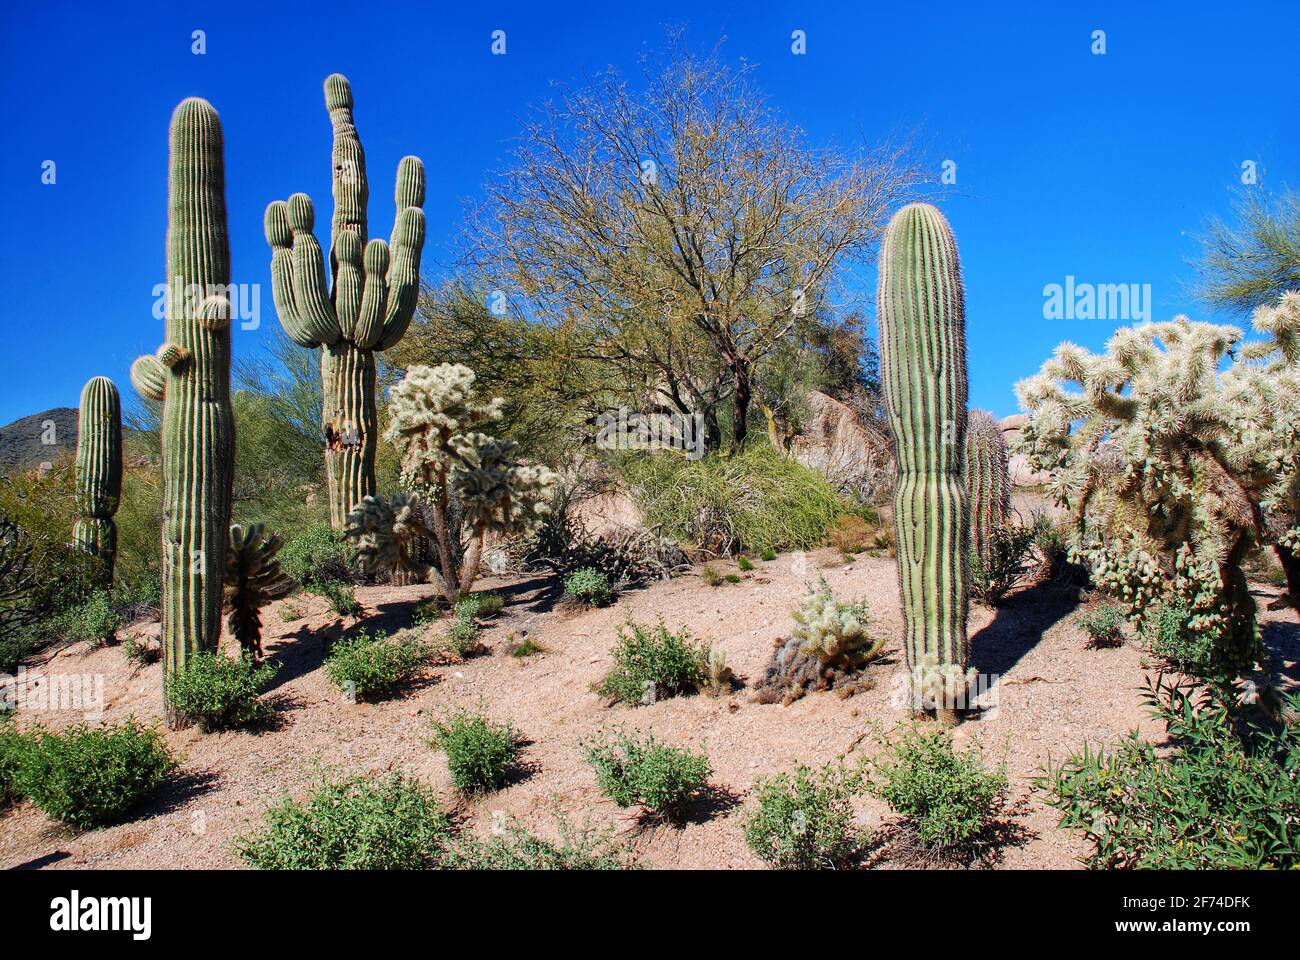 Cacti and other growth in the Arizona desert Stock Photo